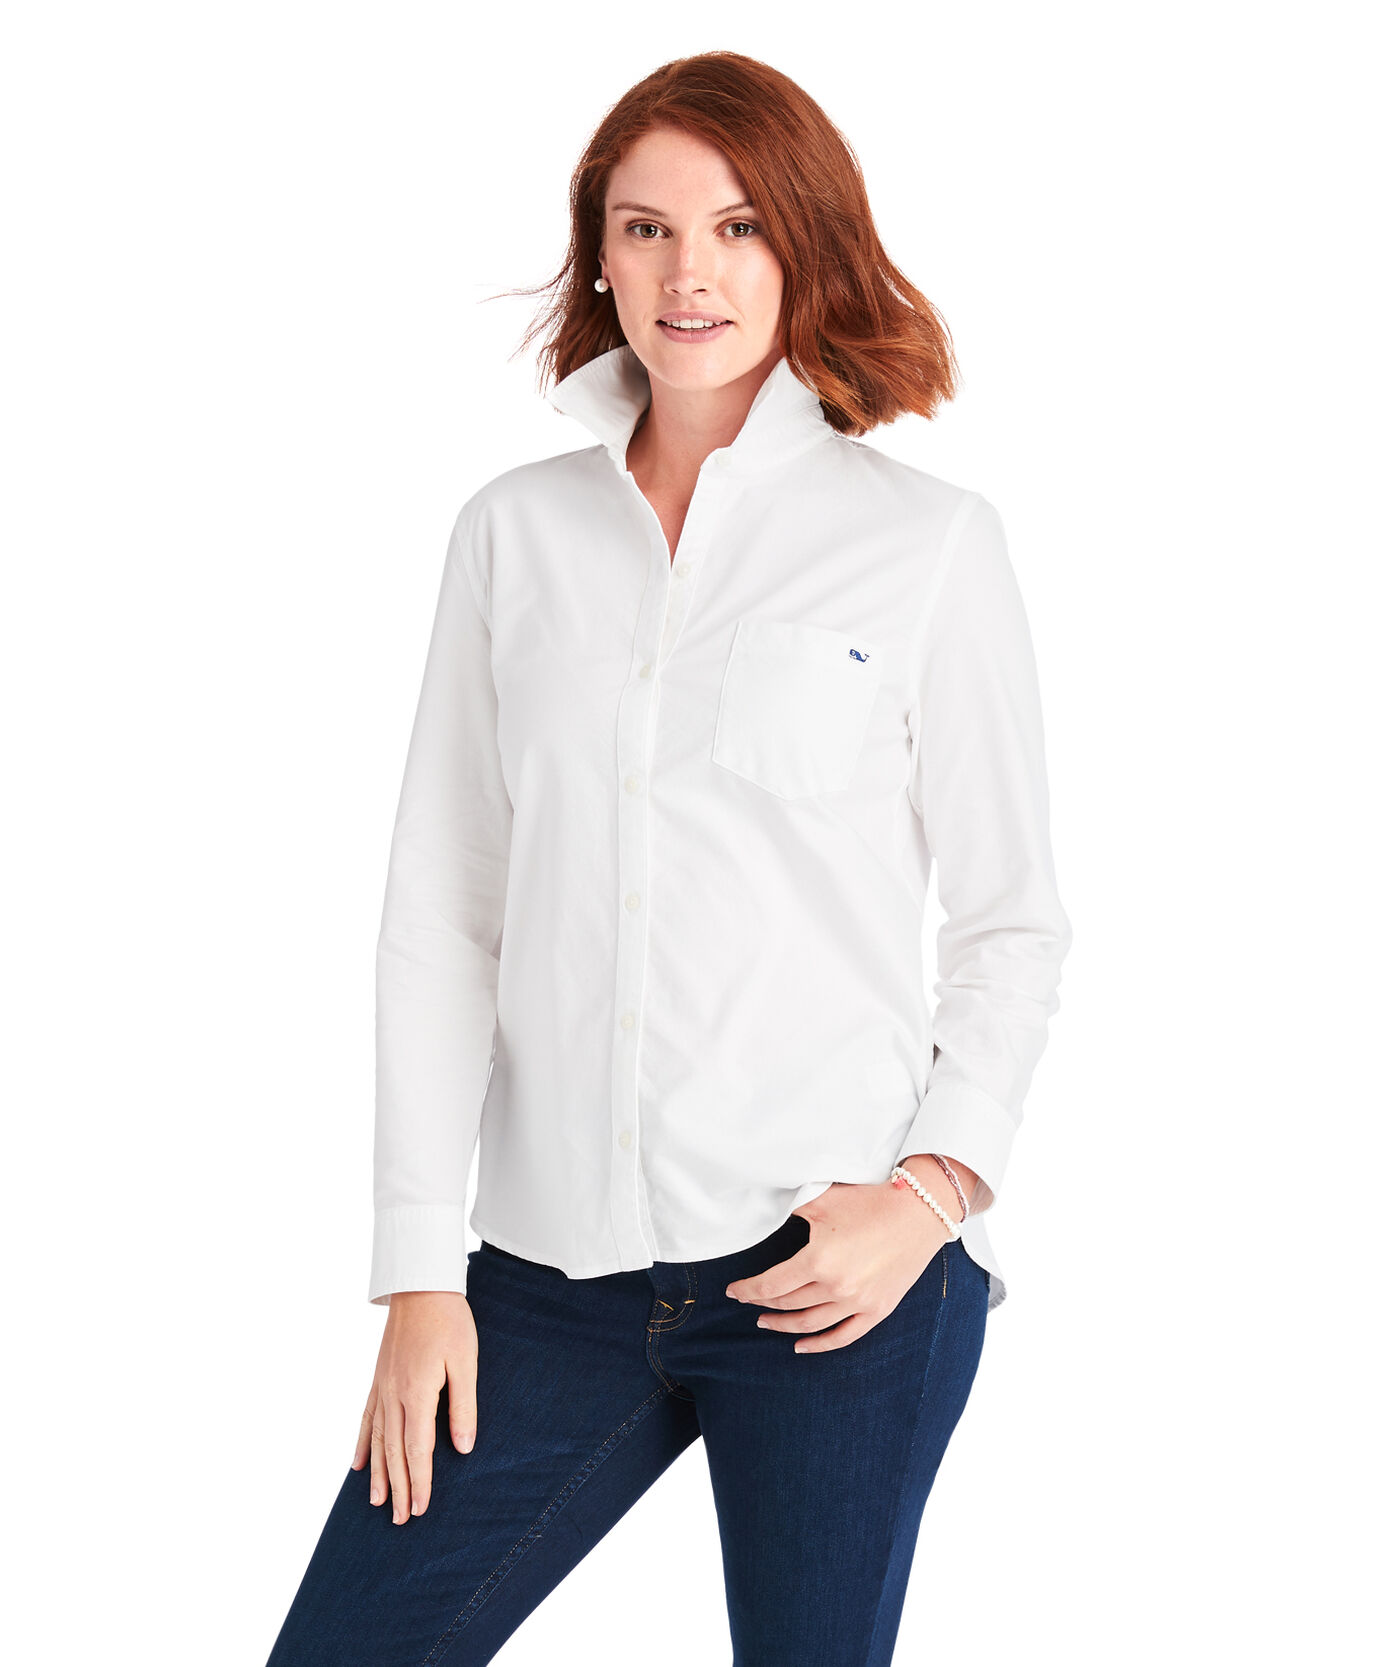 Shop Chilmark Relaxed Oxford Button Down at vineyard vines